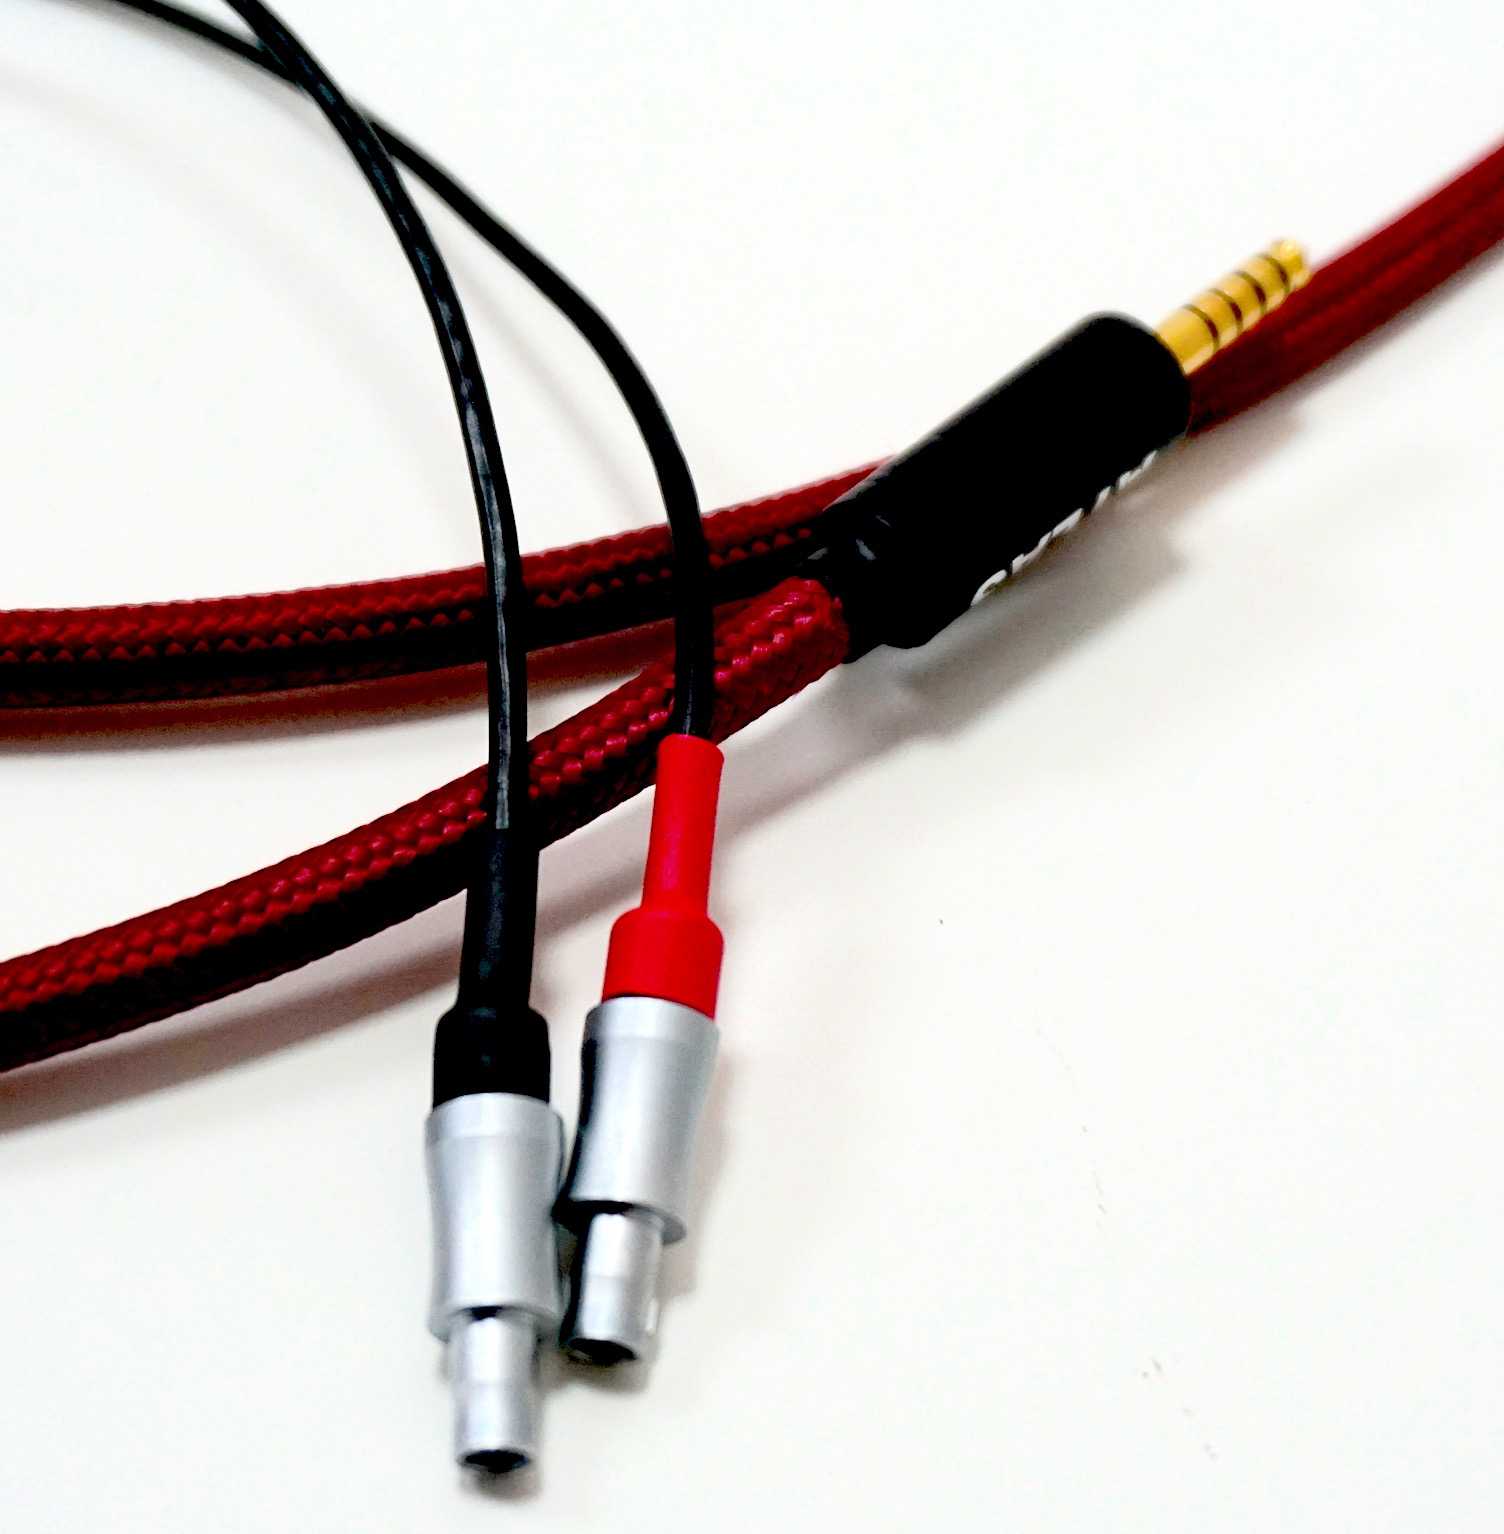 ZENO CABLES FROM ATLAS